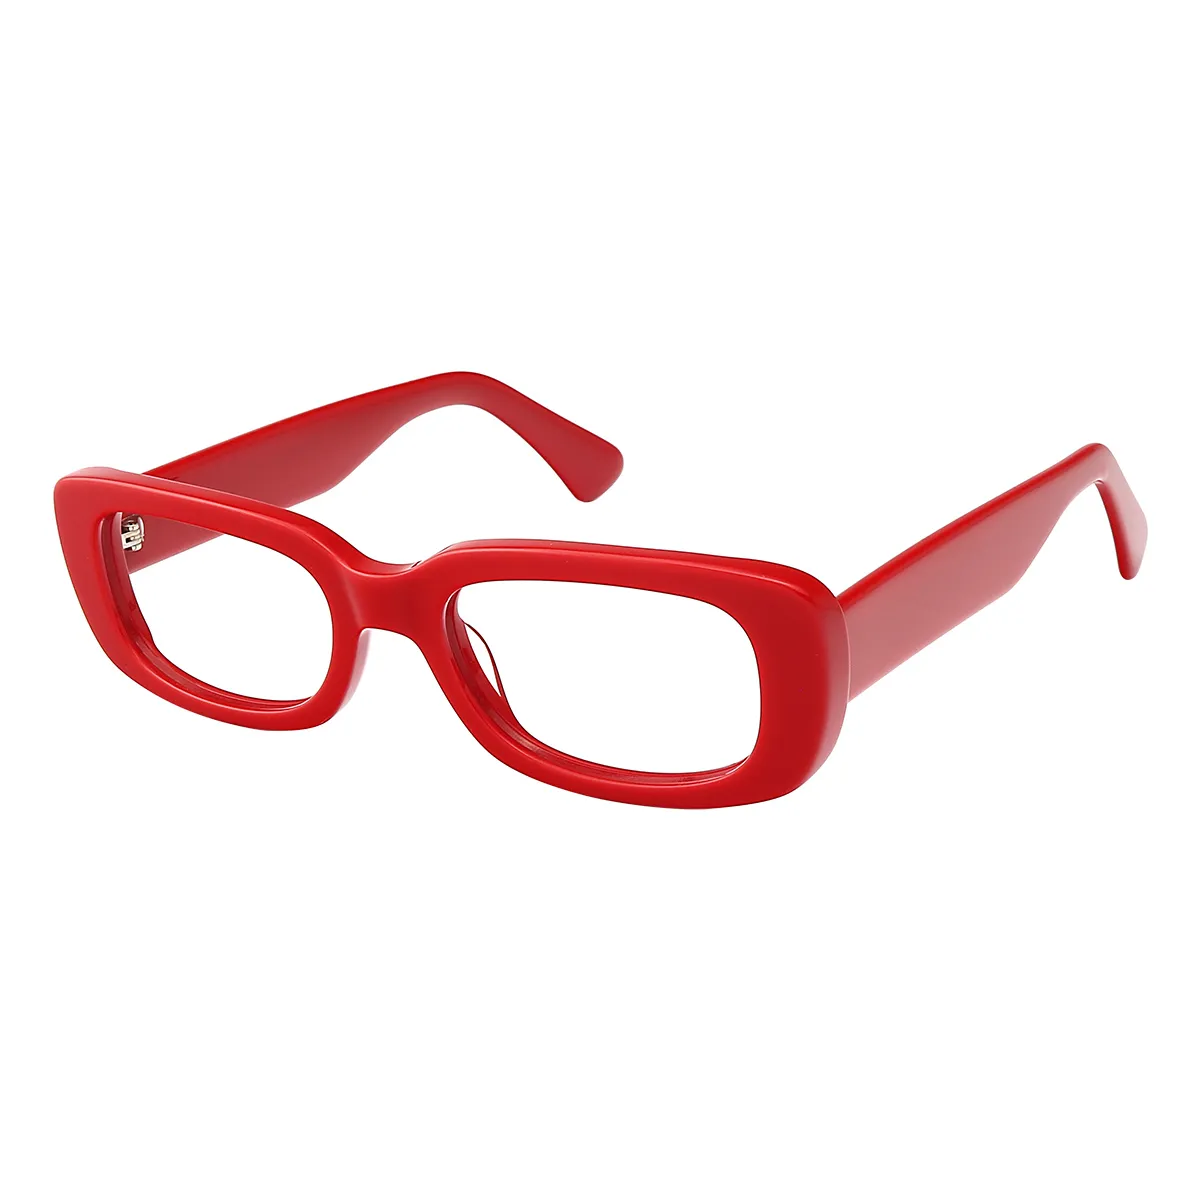 Dieppe - Rectangle Red Glasses for Women